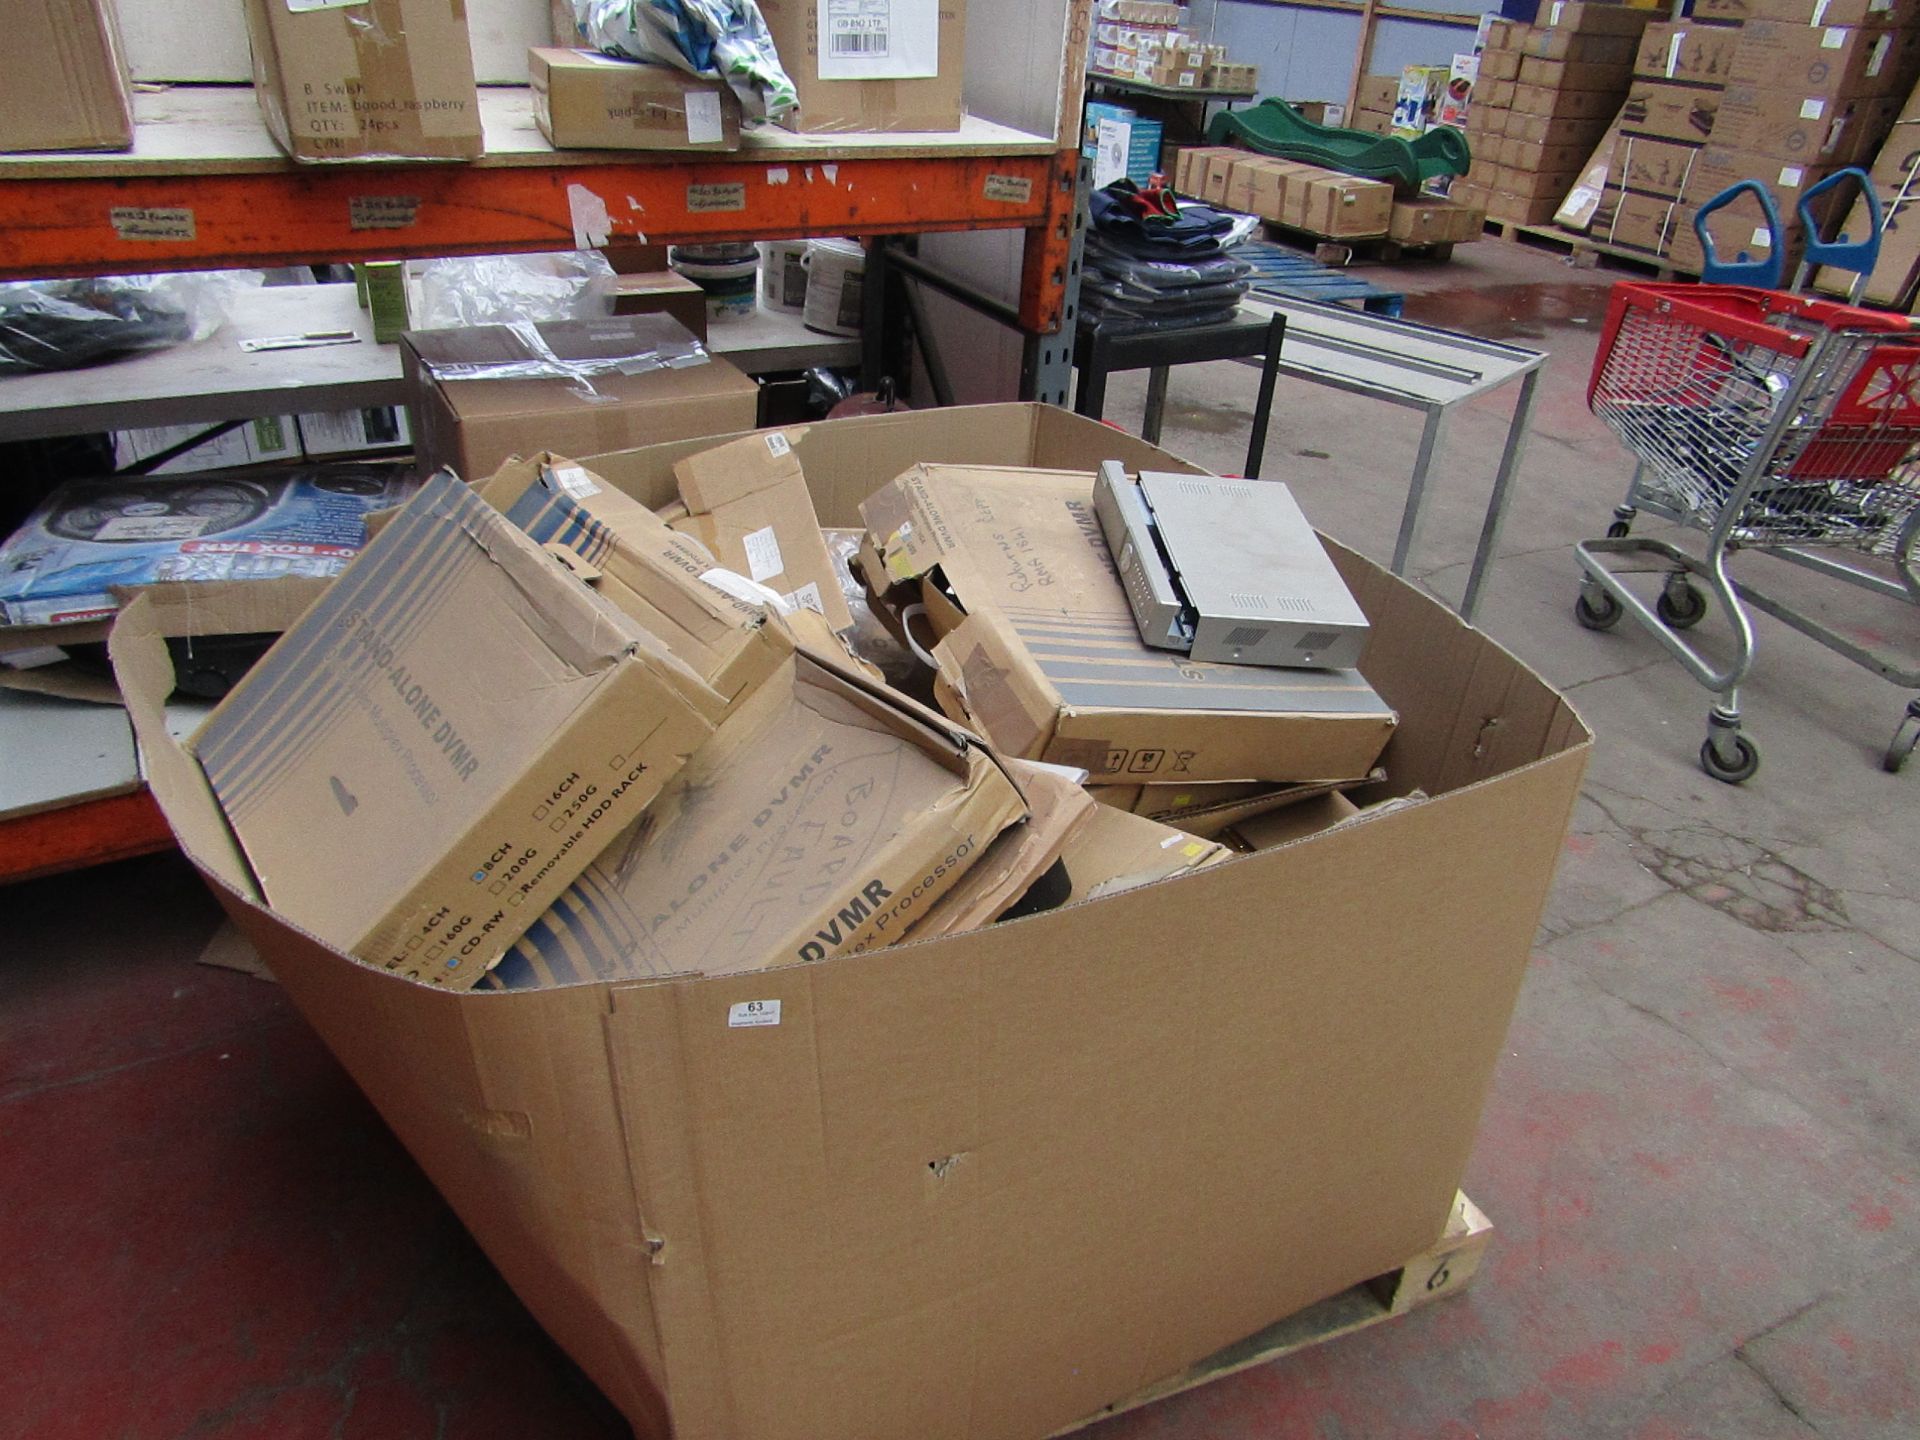 1X PALLET CONTAINING APPROX 20 CCTV DVR SYSTEMS - ALL UNCHECKED AND BOXED |